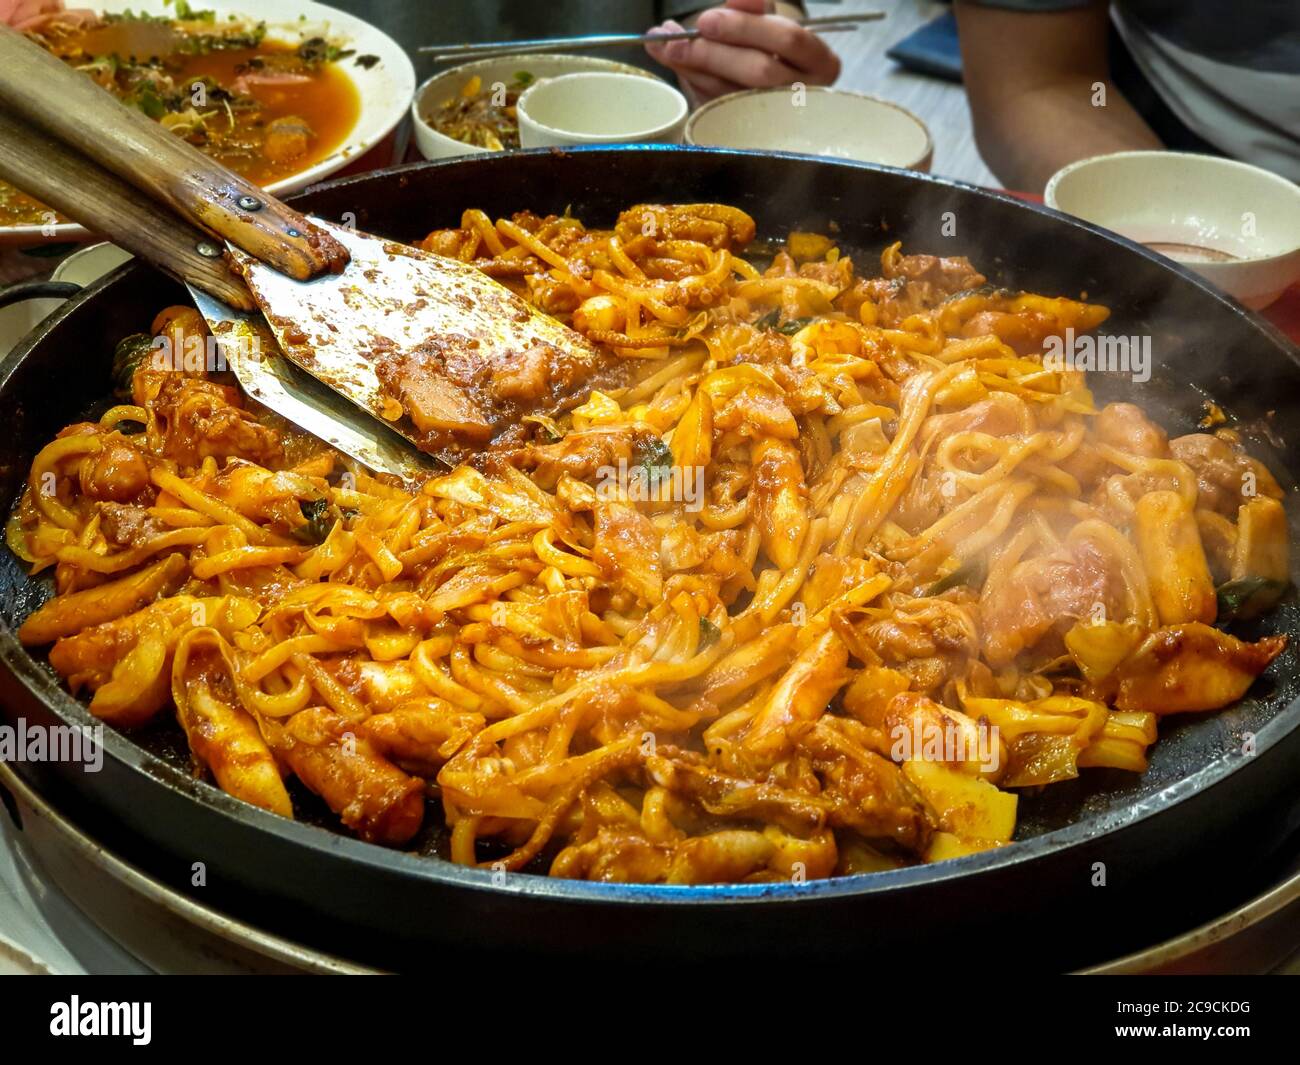 Dak-galbi, spicy stir-fried chicken rib, vegetable and noodle on grill - South Korea. Popular Korean food among foreign tourists. Stock Photo